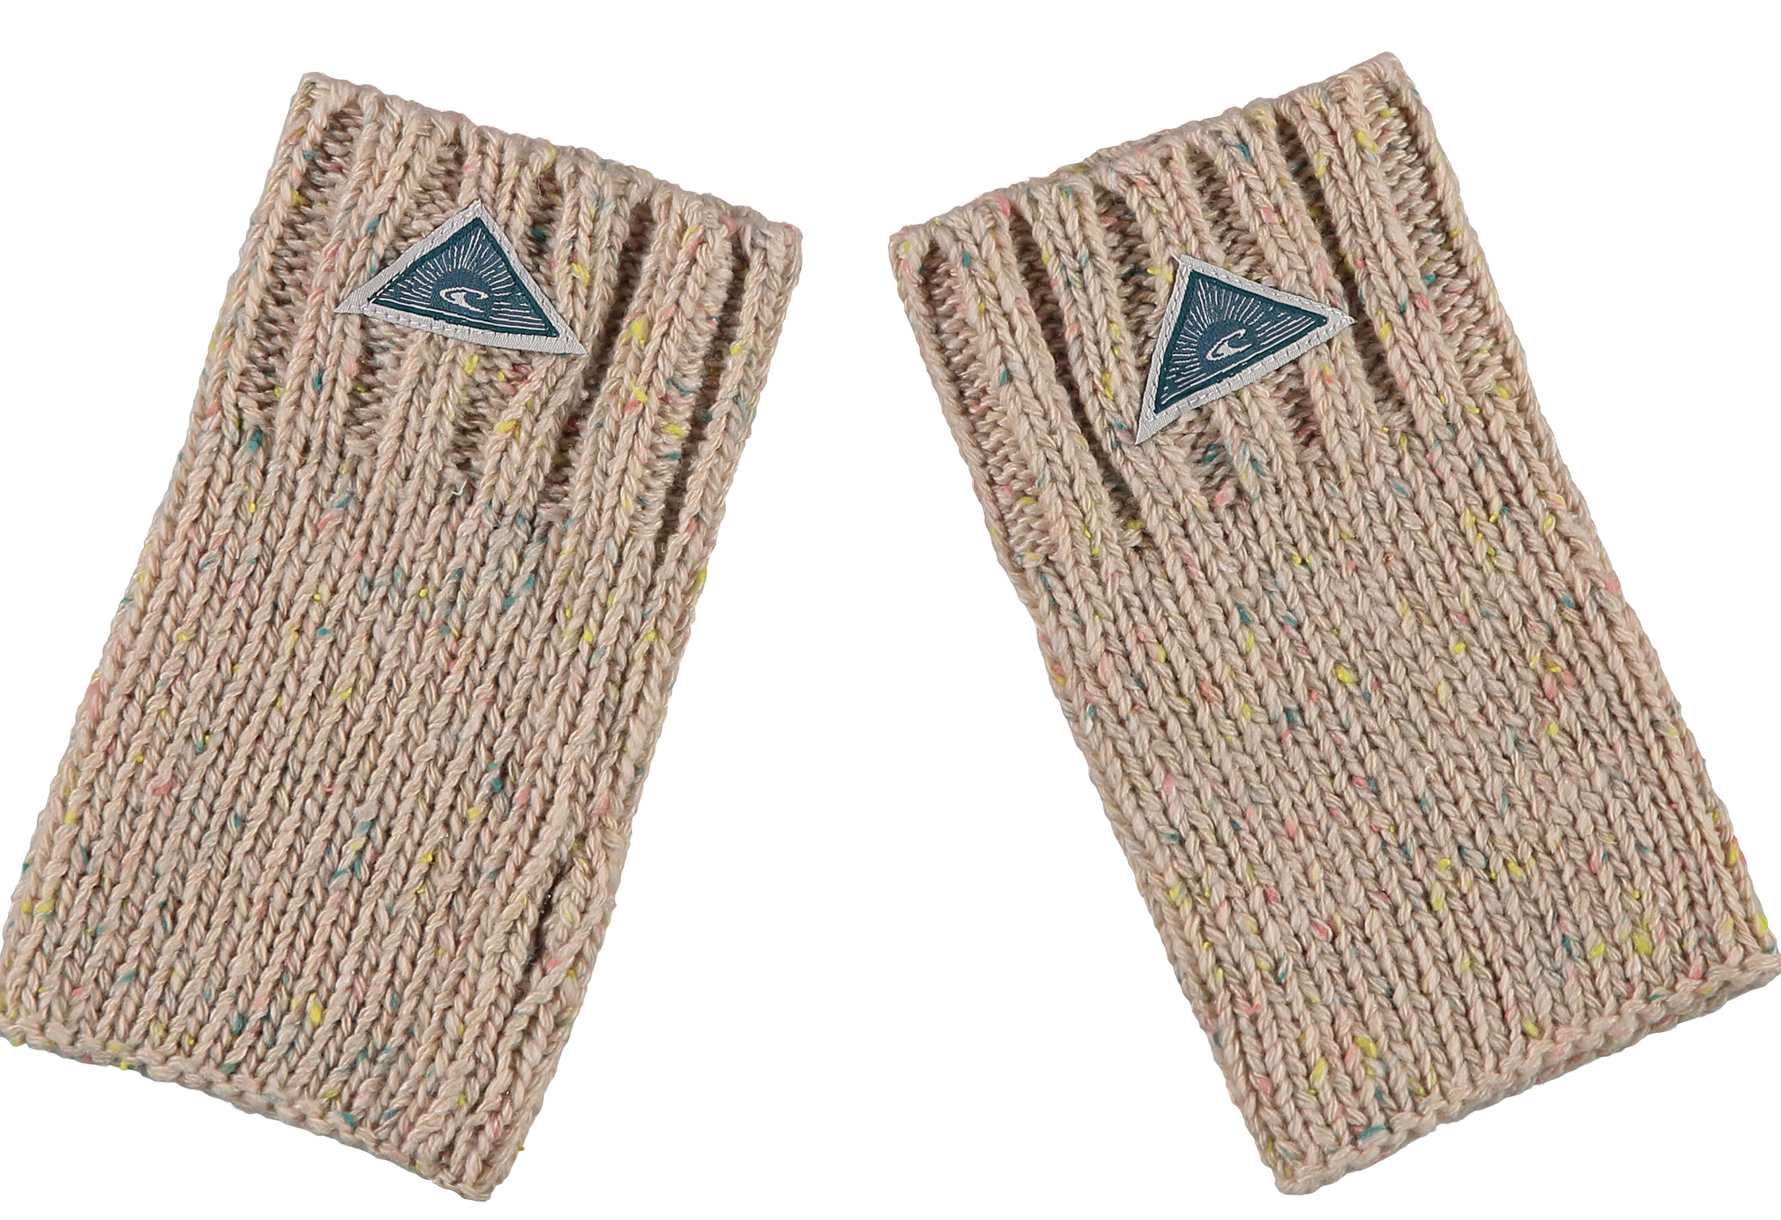 Women’s knitted arm warmers